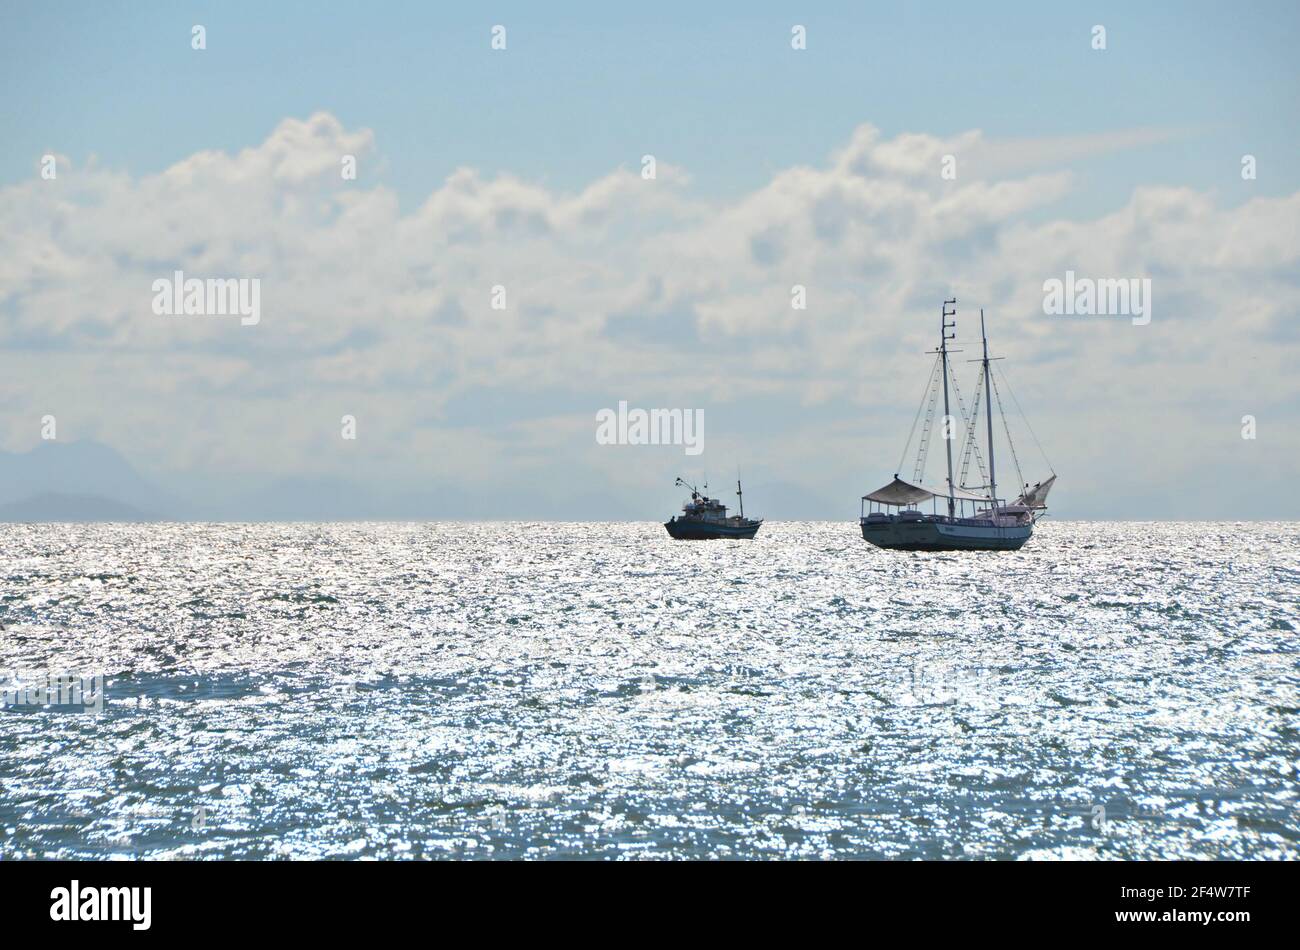 Landscape with view of a traditional sightseeing Schooner on the waters of Armação dos Búzios, the renown resort town of Rio de Janeiro, Brazil. Stock Photo